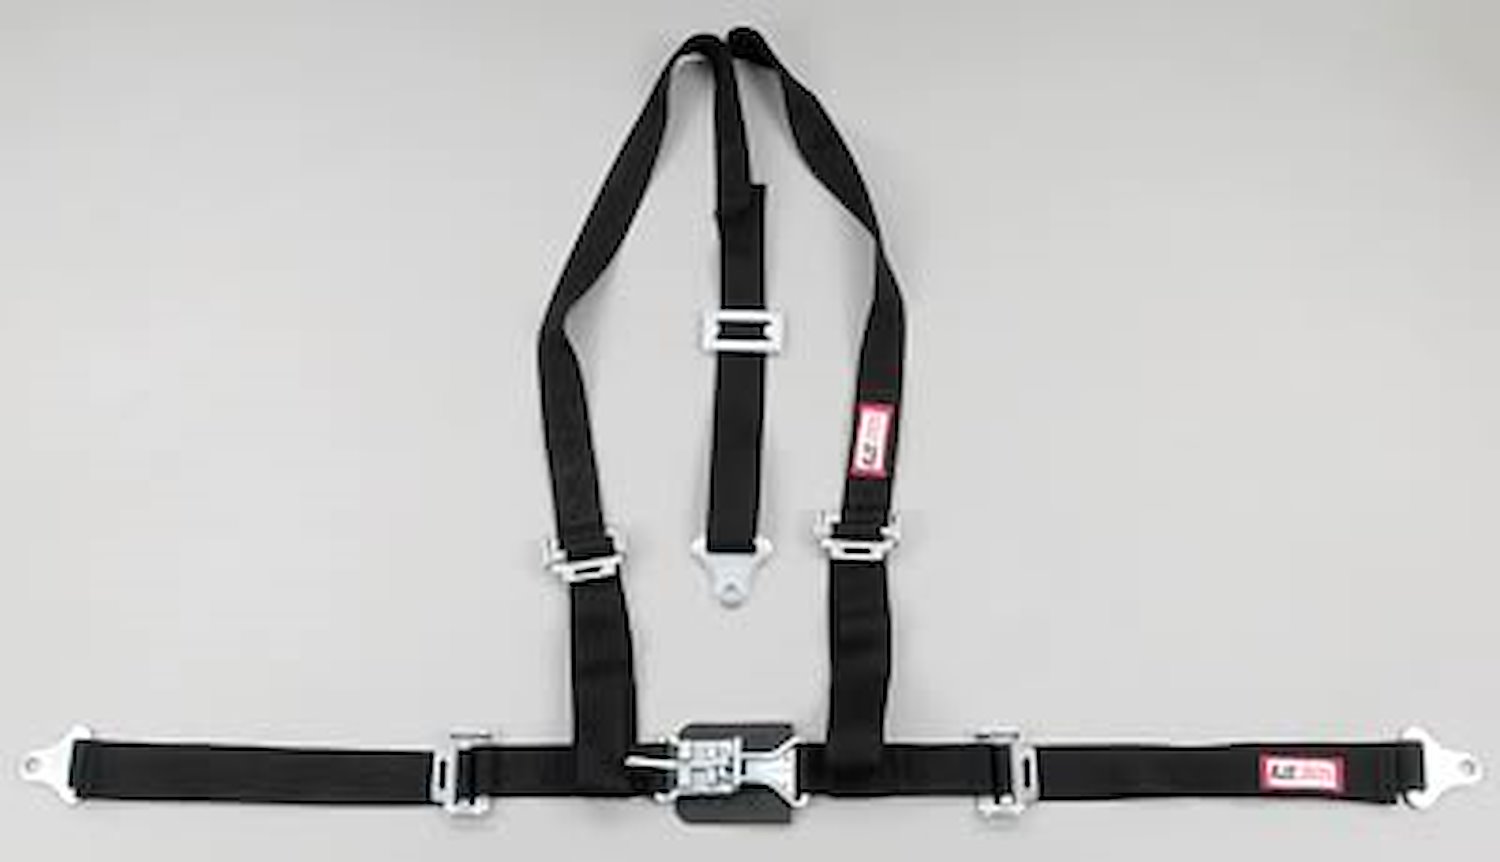 NON-SFI L&L HARNESS 3 PULL UP Lap Belt BOLT SEWN IN 2 S.H. Y FLOOR Mount w/STERNUM STRAP WRAP/BOLT GRAY